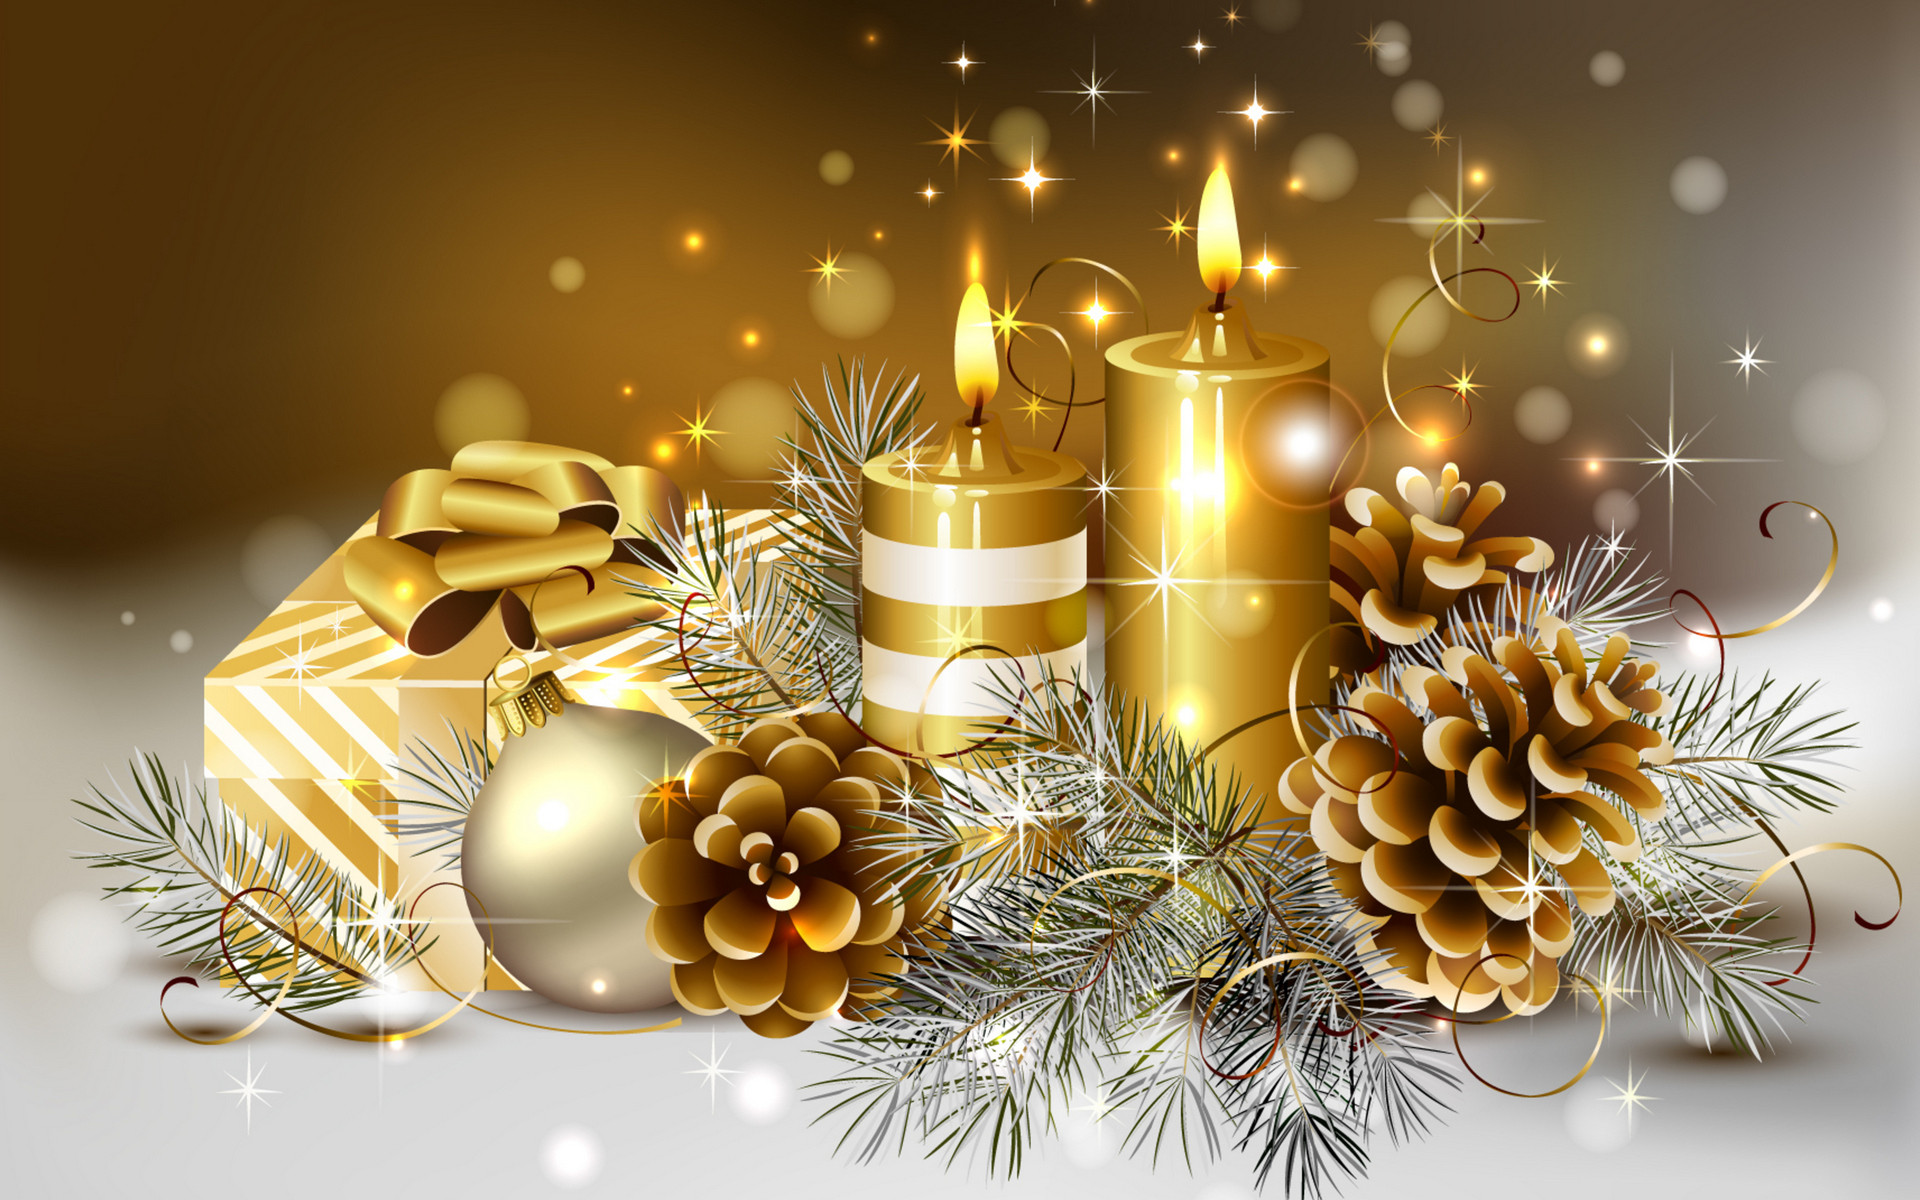 Beautiful HD Wallpapers for Christmas